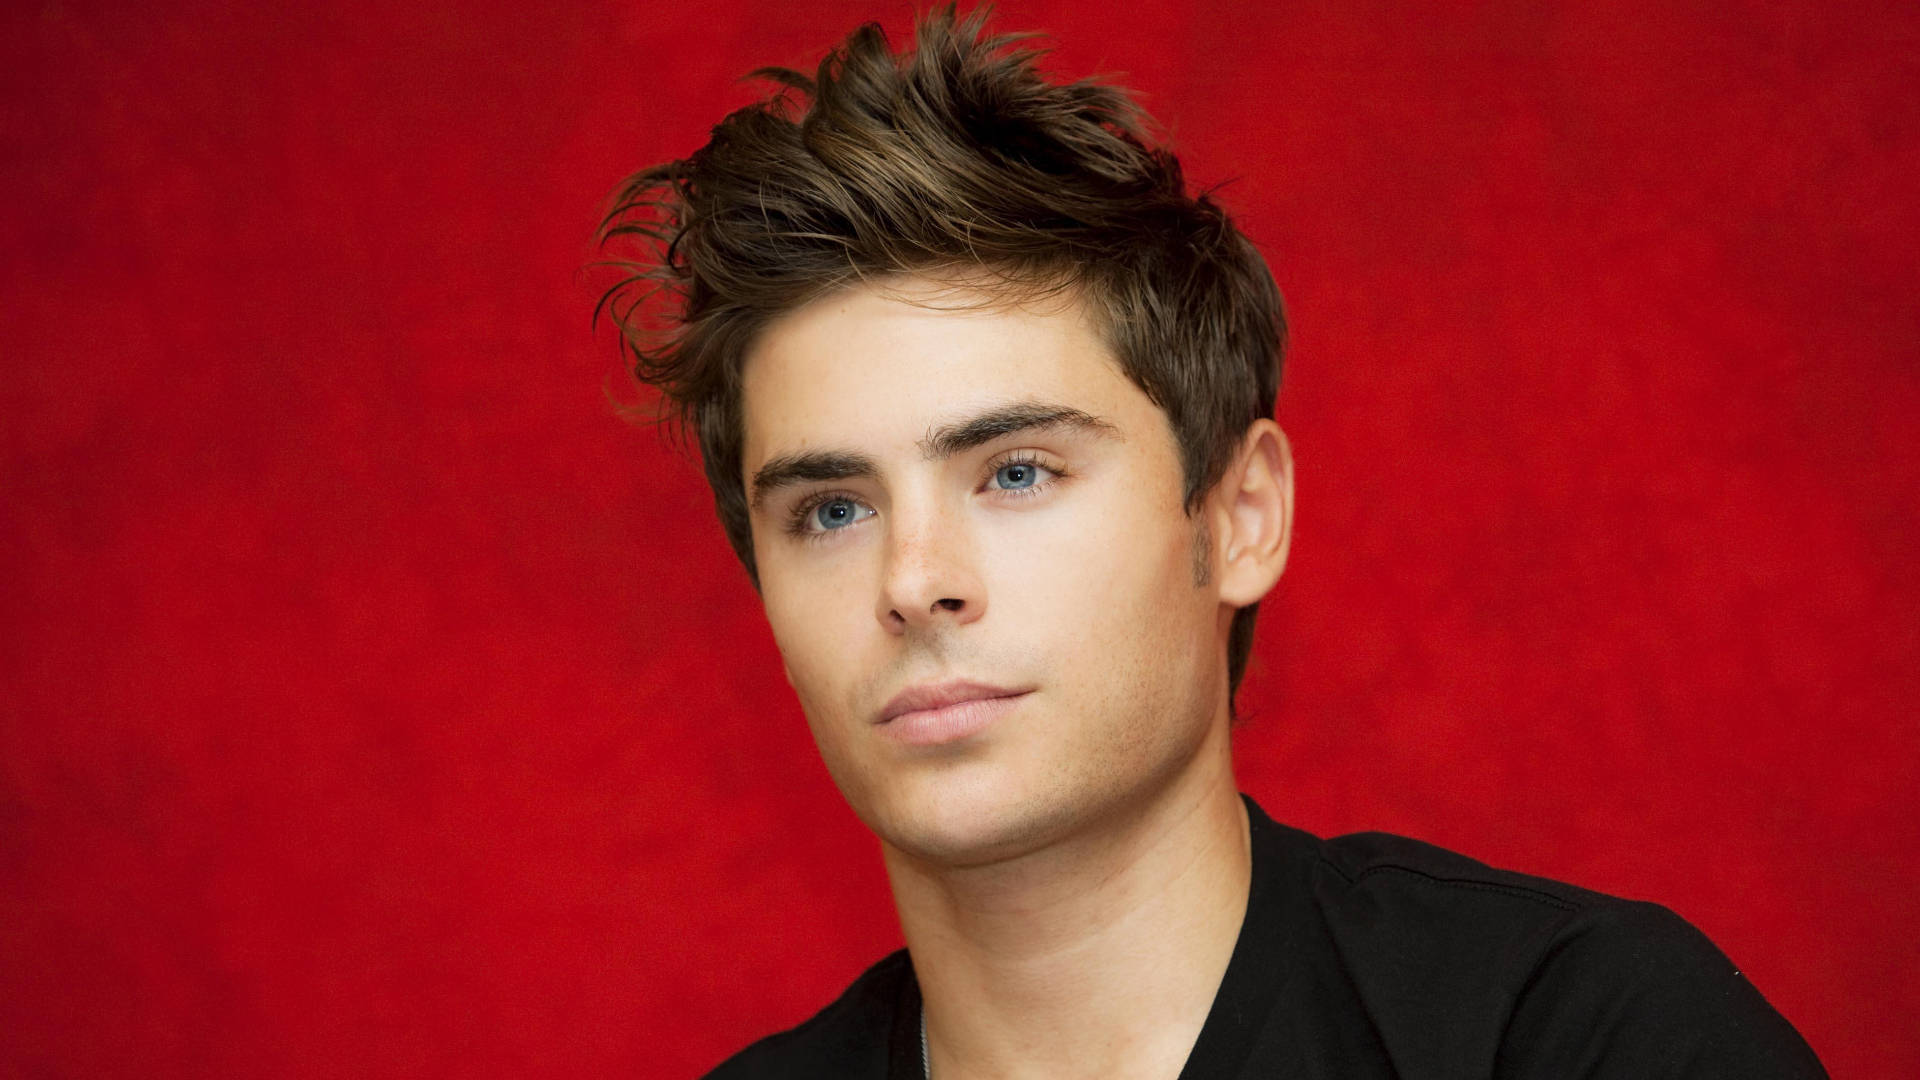 Zac Efron Looking Suave In A Red Backdrop Background